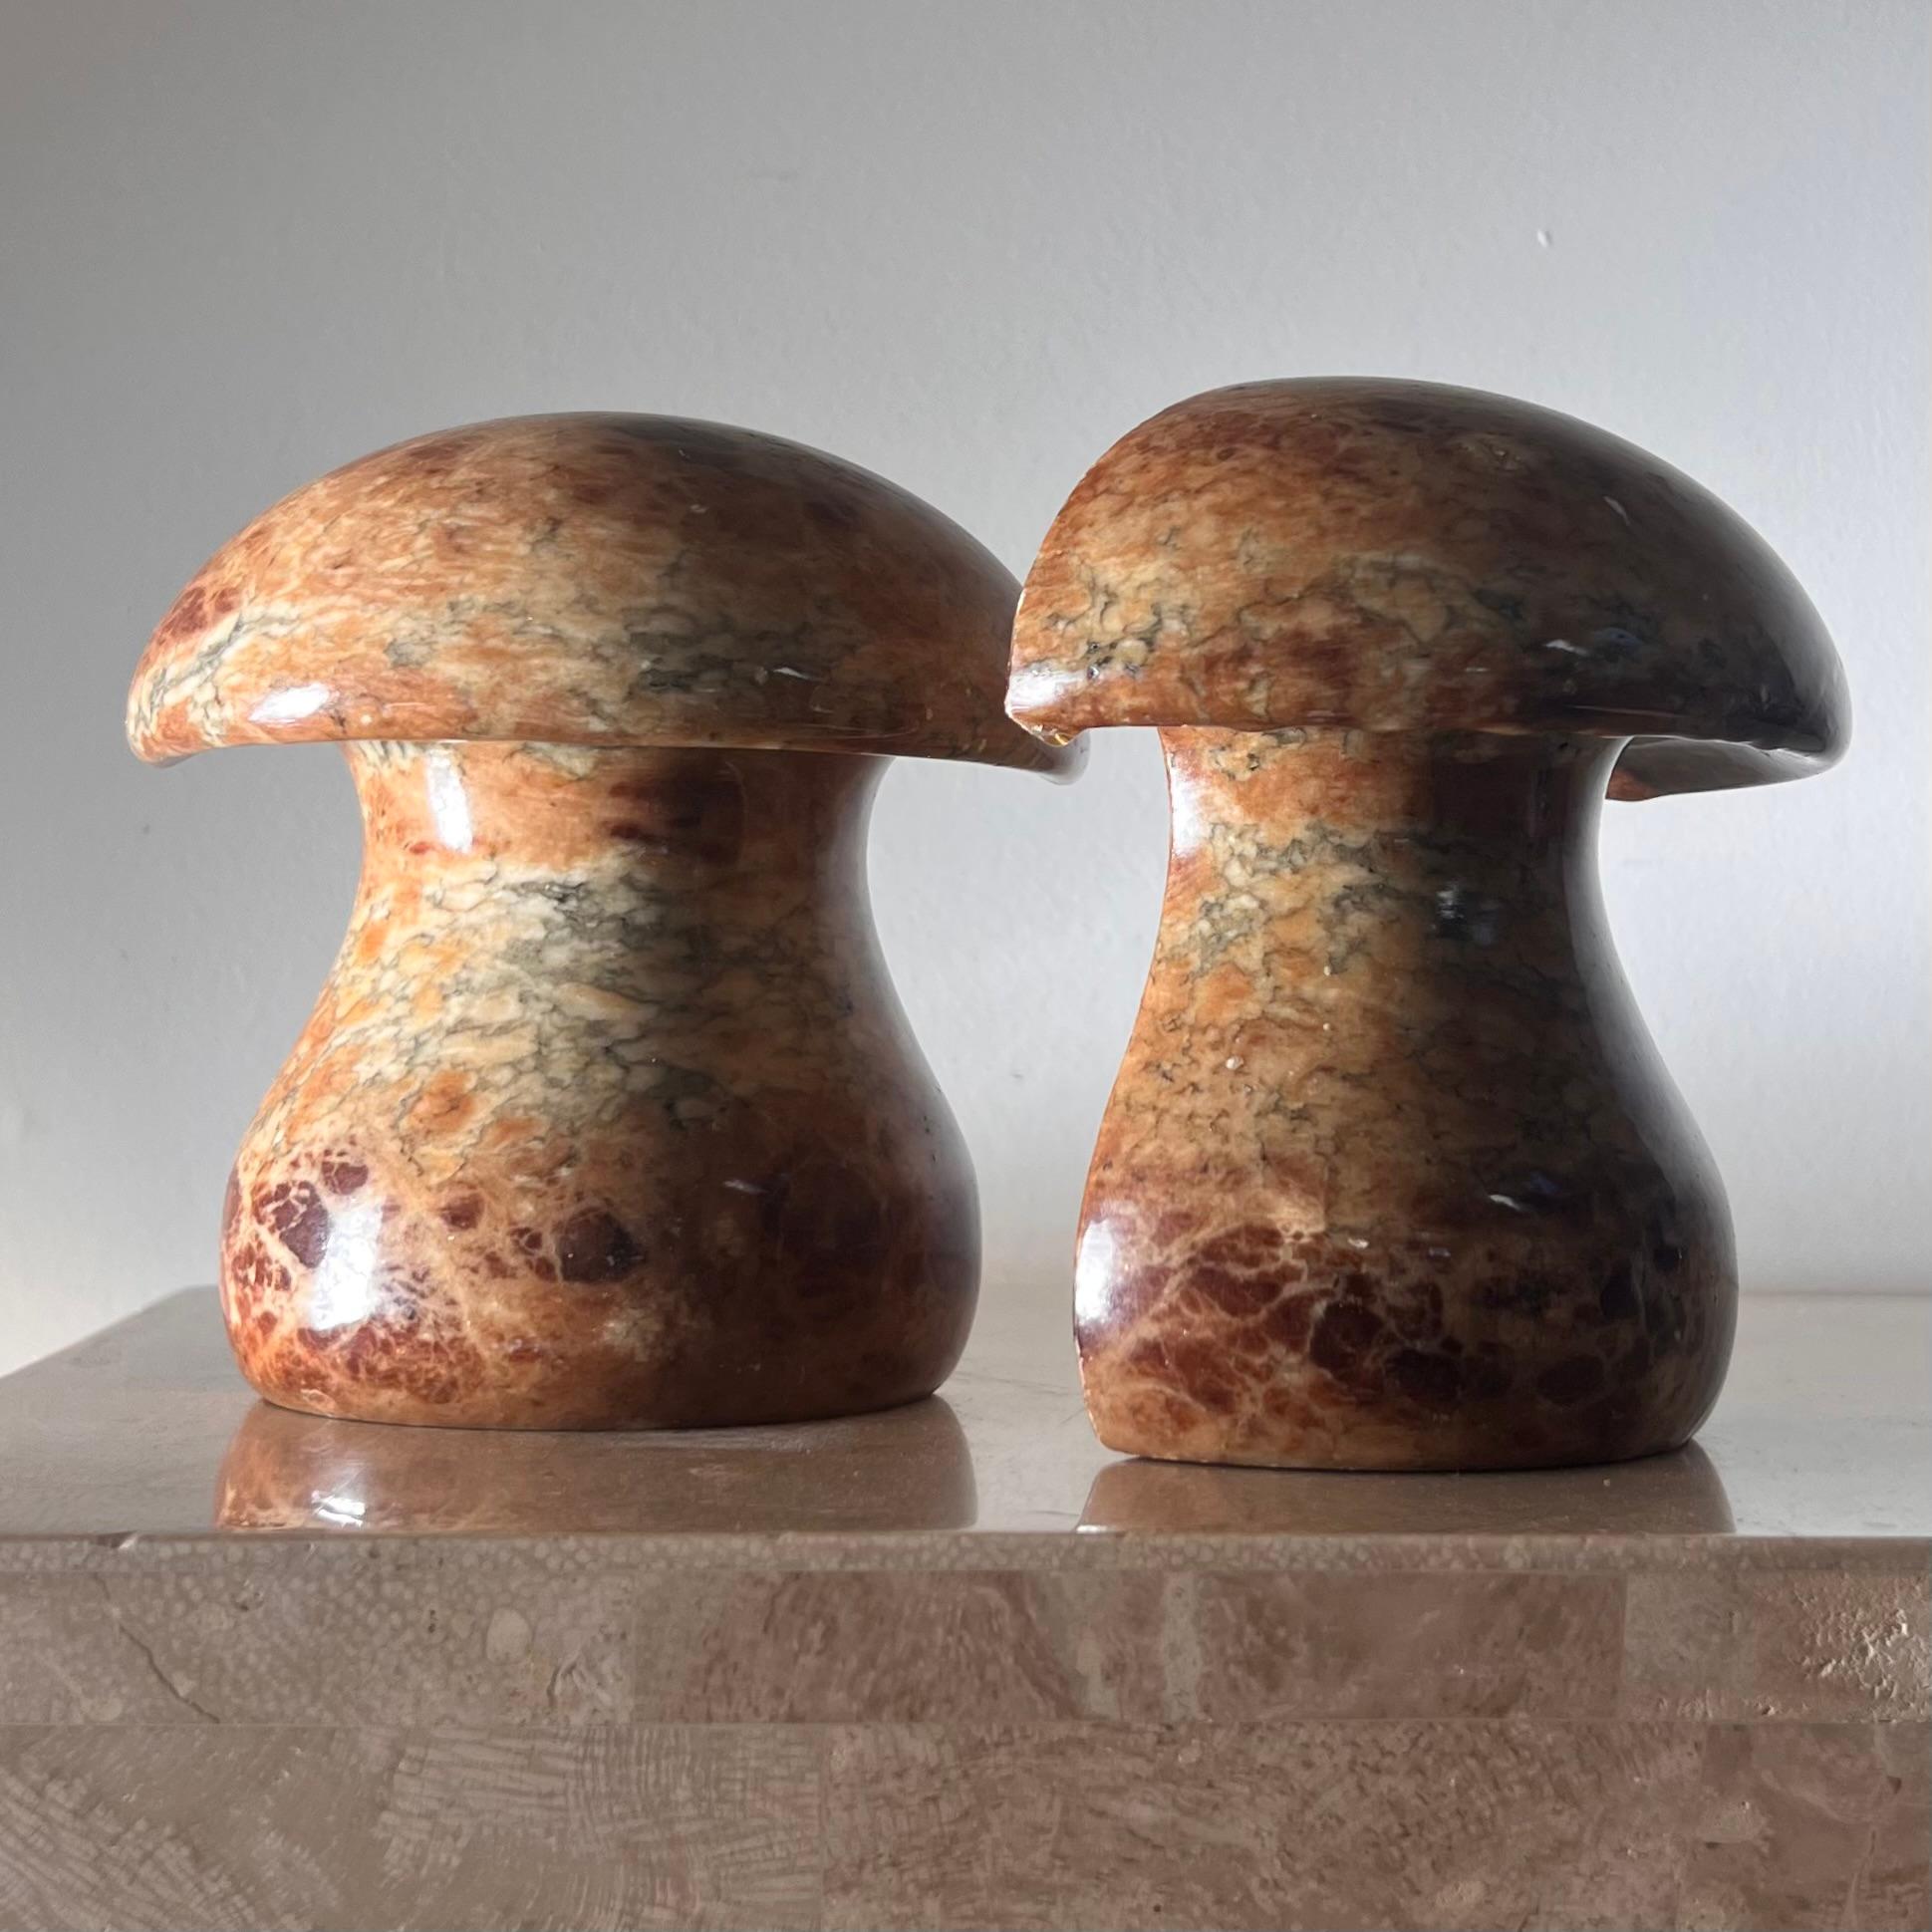 A pair of vintage Italian alabaster marble mushroom bookends, hand-carved in Volterra circa mid 1960s. Tones of chestnut, pewter, and caramel. Some wear consistent with age and use but no glaring flaws. Pick up in central west Los Angeles or we ship